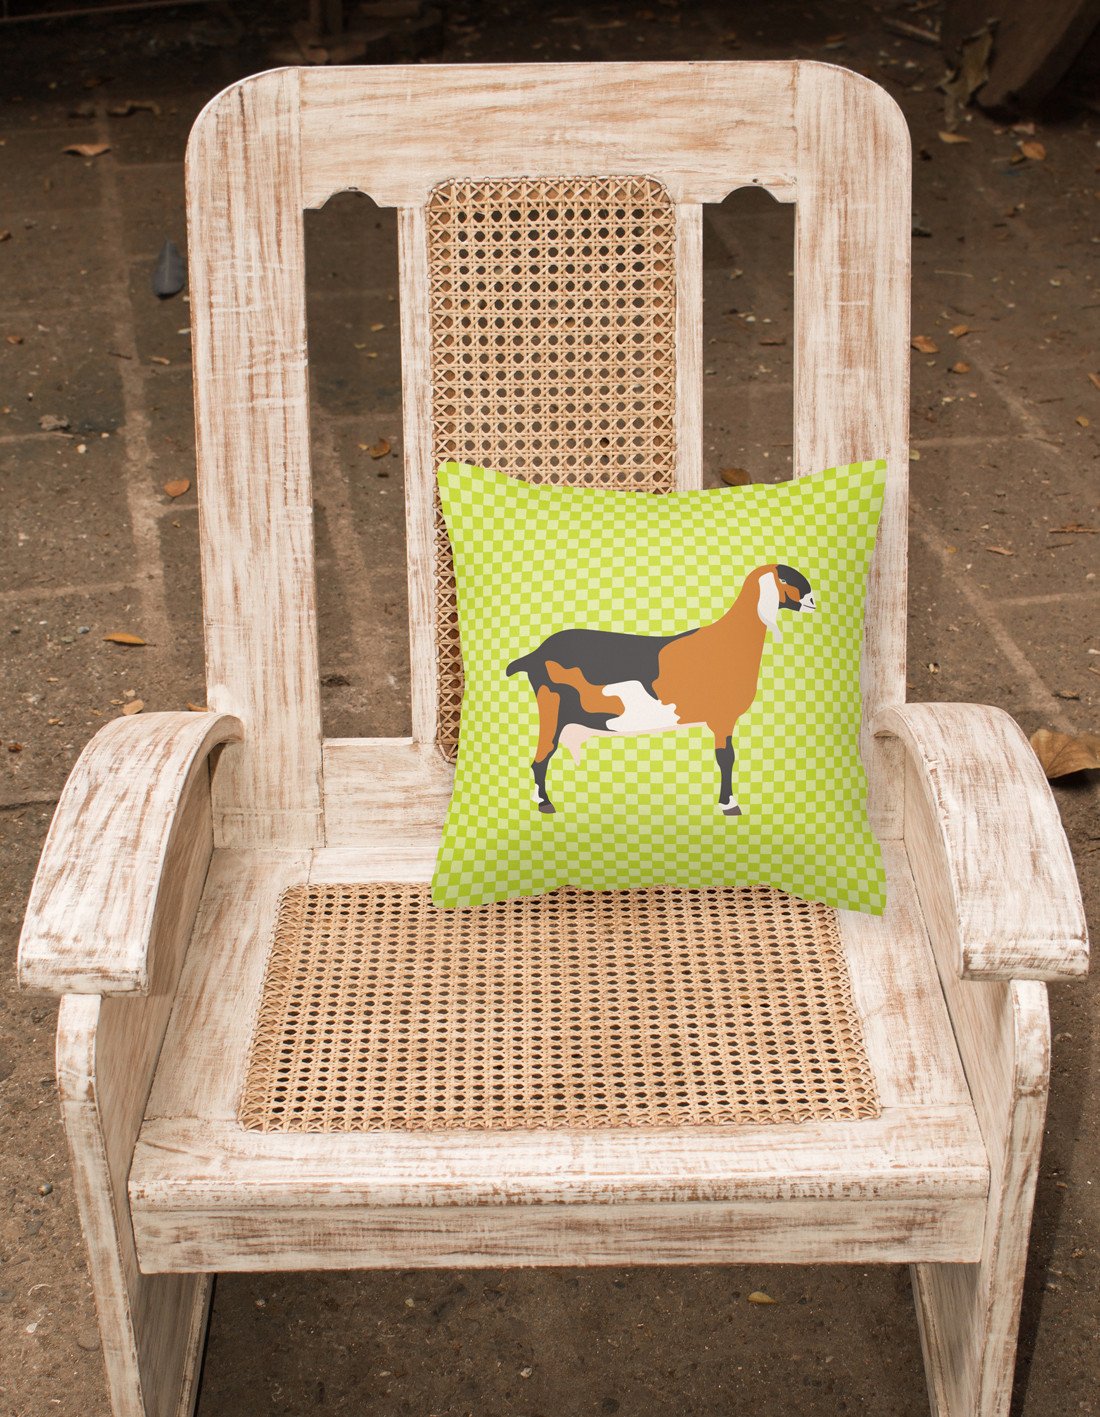 Anglo-nubian Nubian Goat Green Fabric Decorative Pillow BB7709PW1818 by Caroline's Treasures